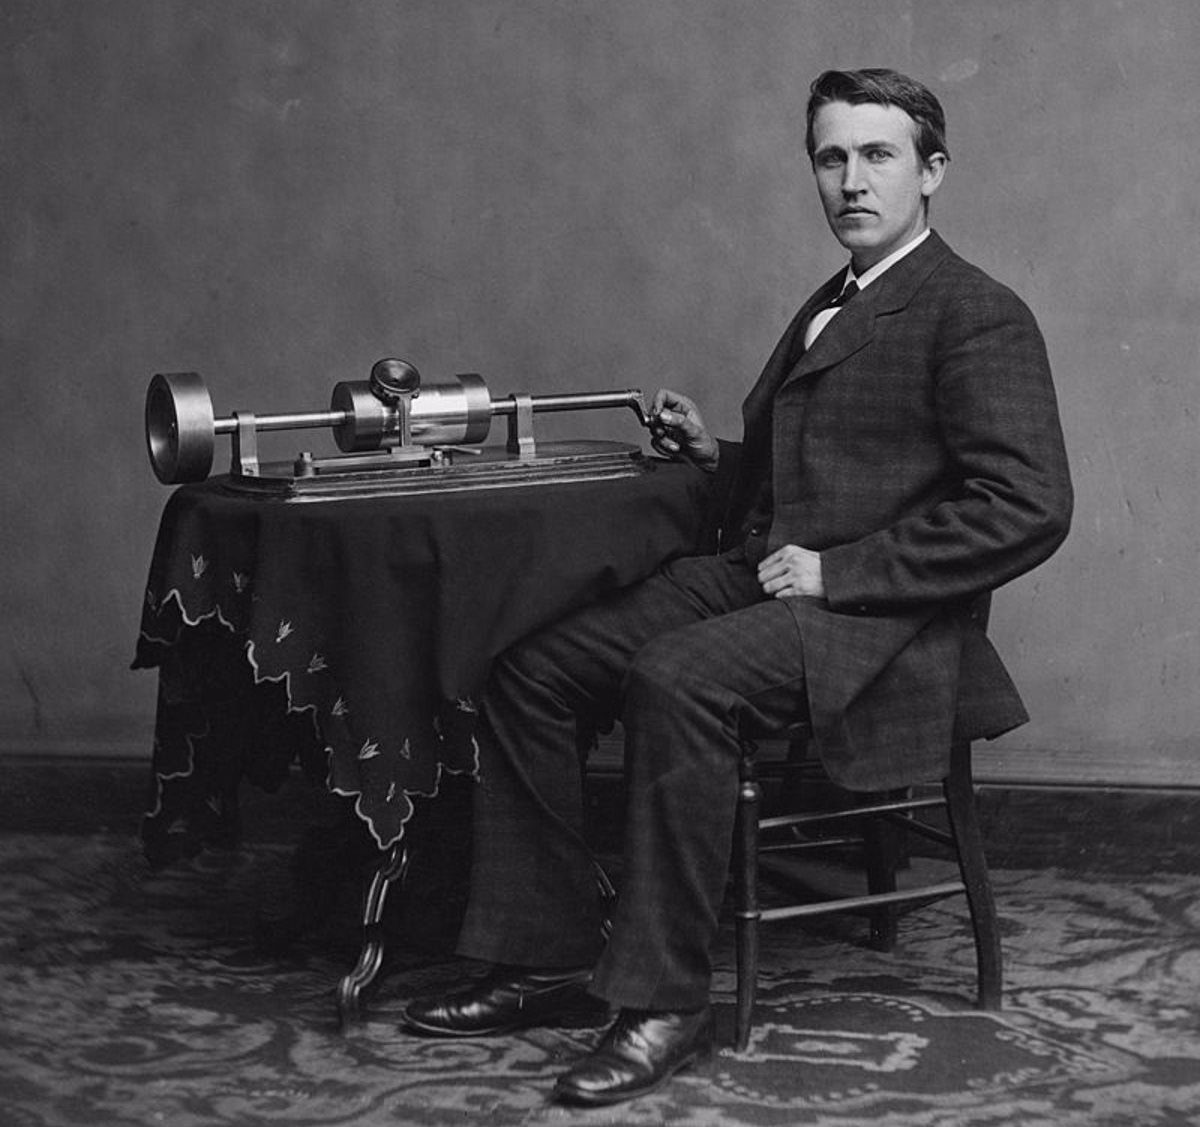 It is the 145th anniversary of Edison's phonograph.